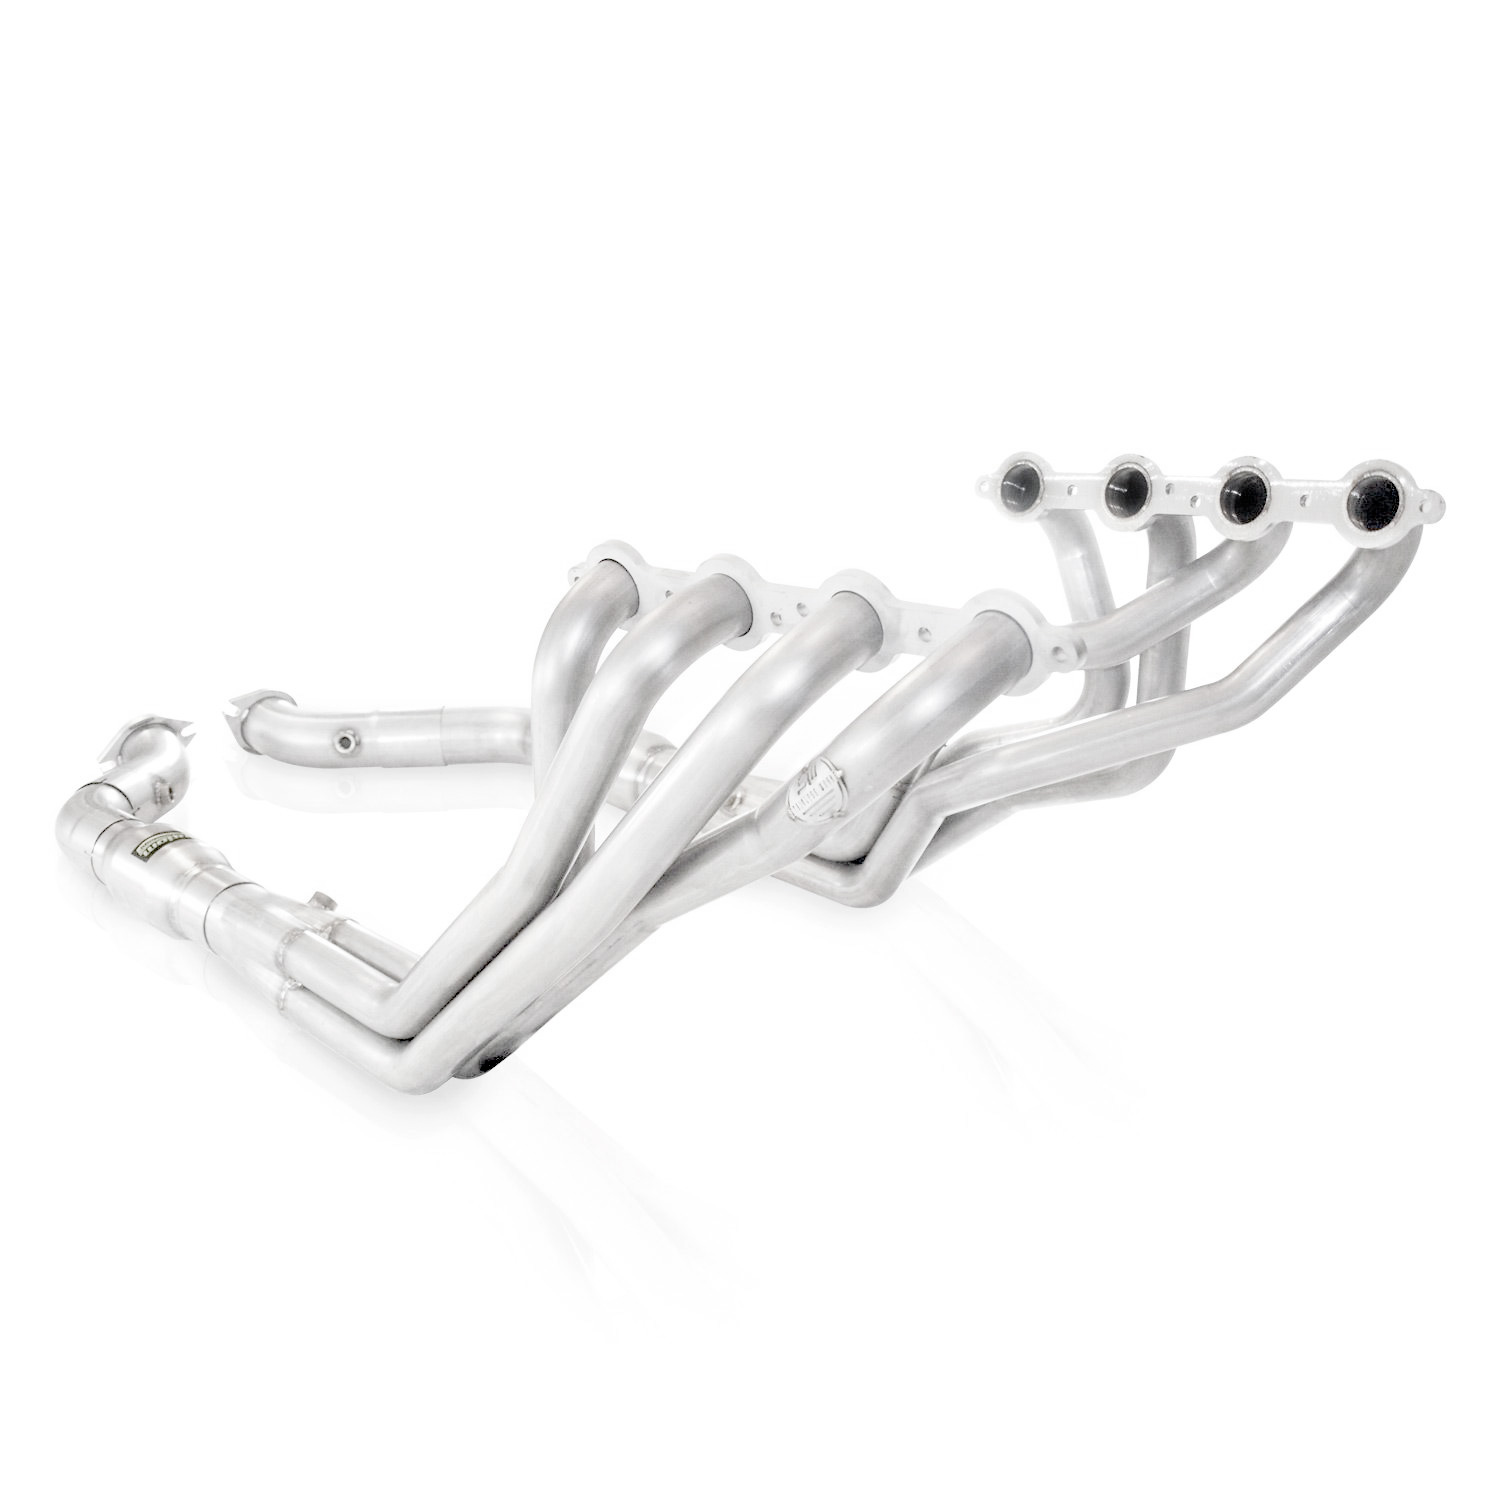 2005-2006 GTO 6.0L SW Headers 1-3/4" With Catted Leads Factory Connect